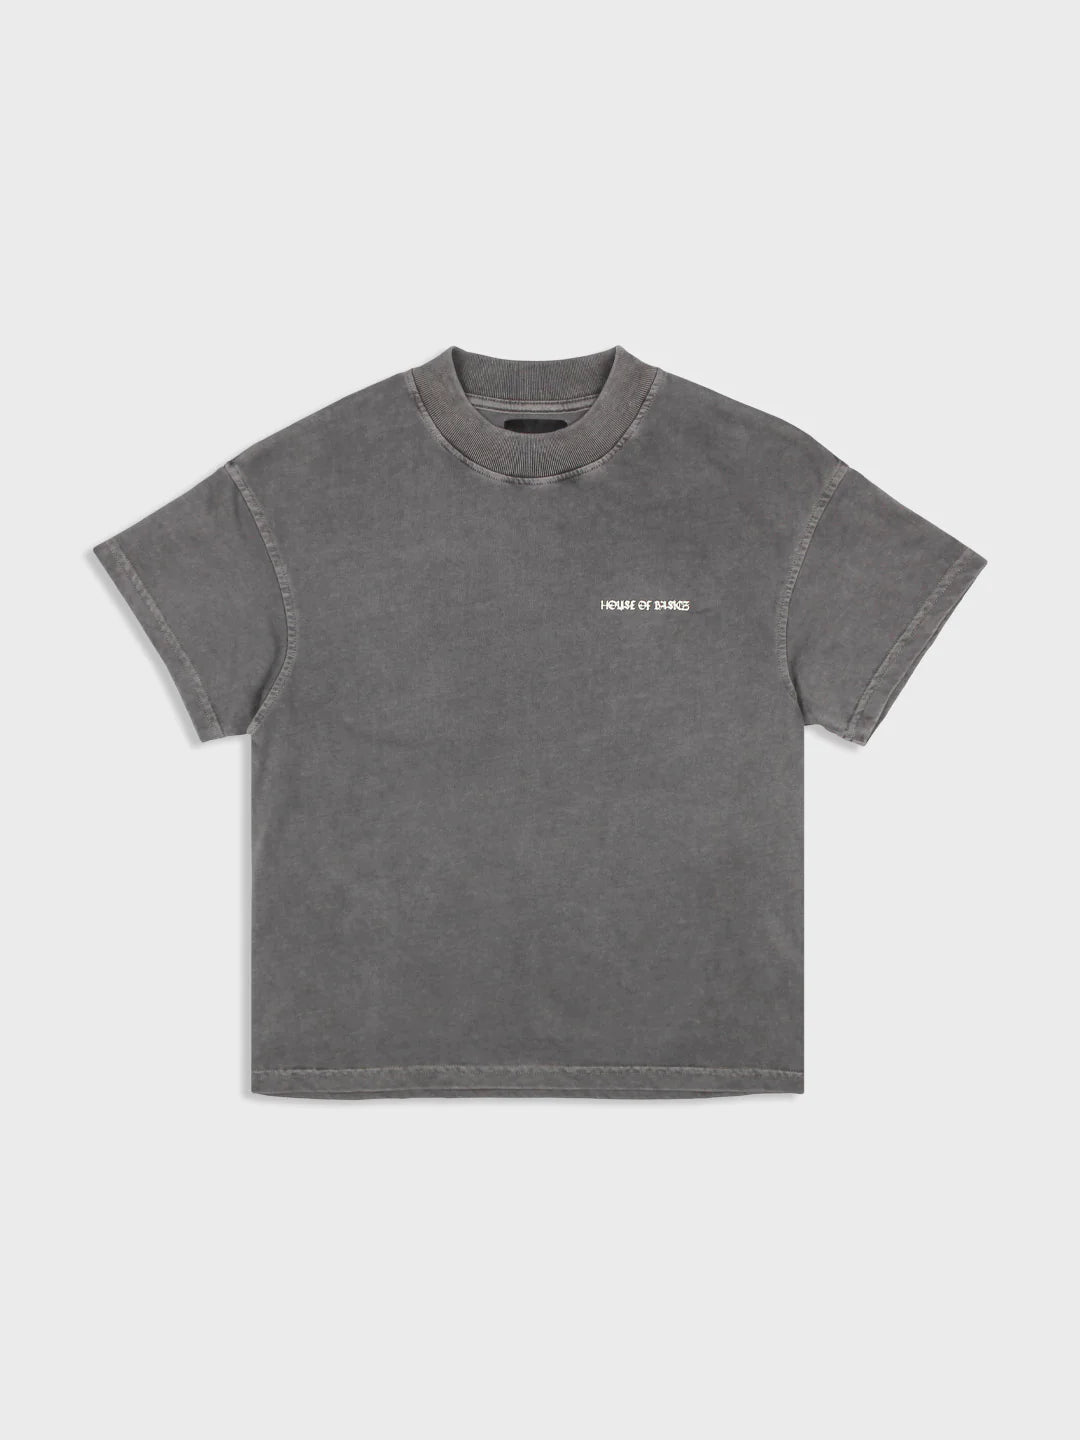 HOUSE OF BASICZ - THE GRAY VINTAGE OVERSIZED TEE